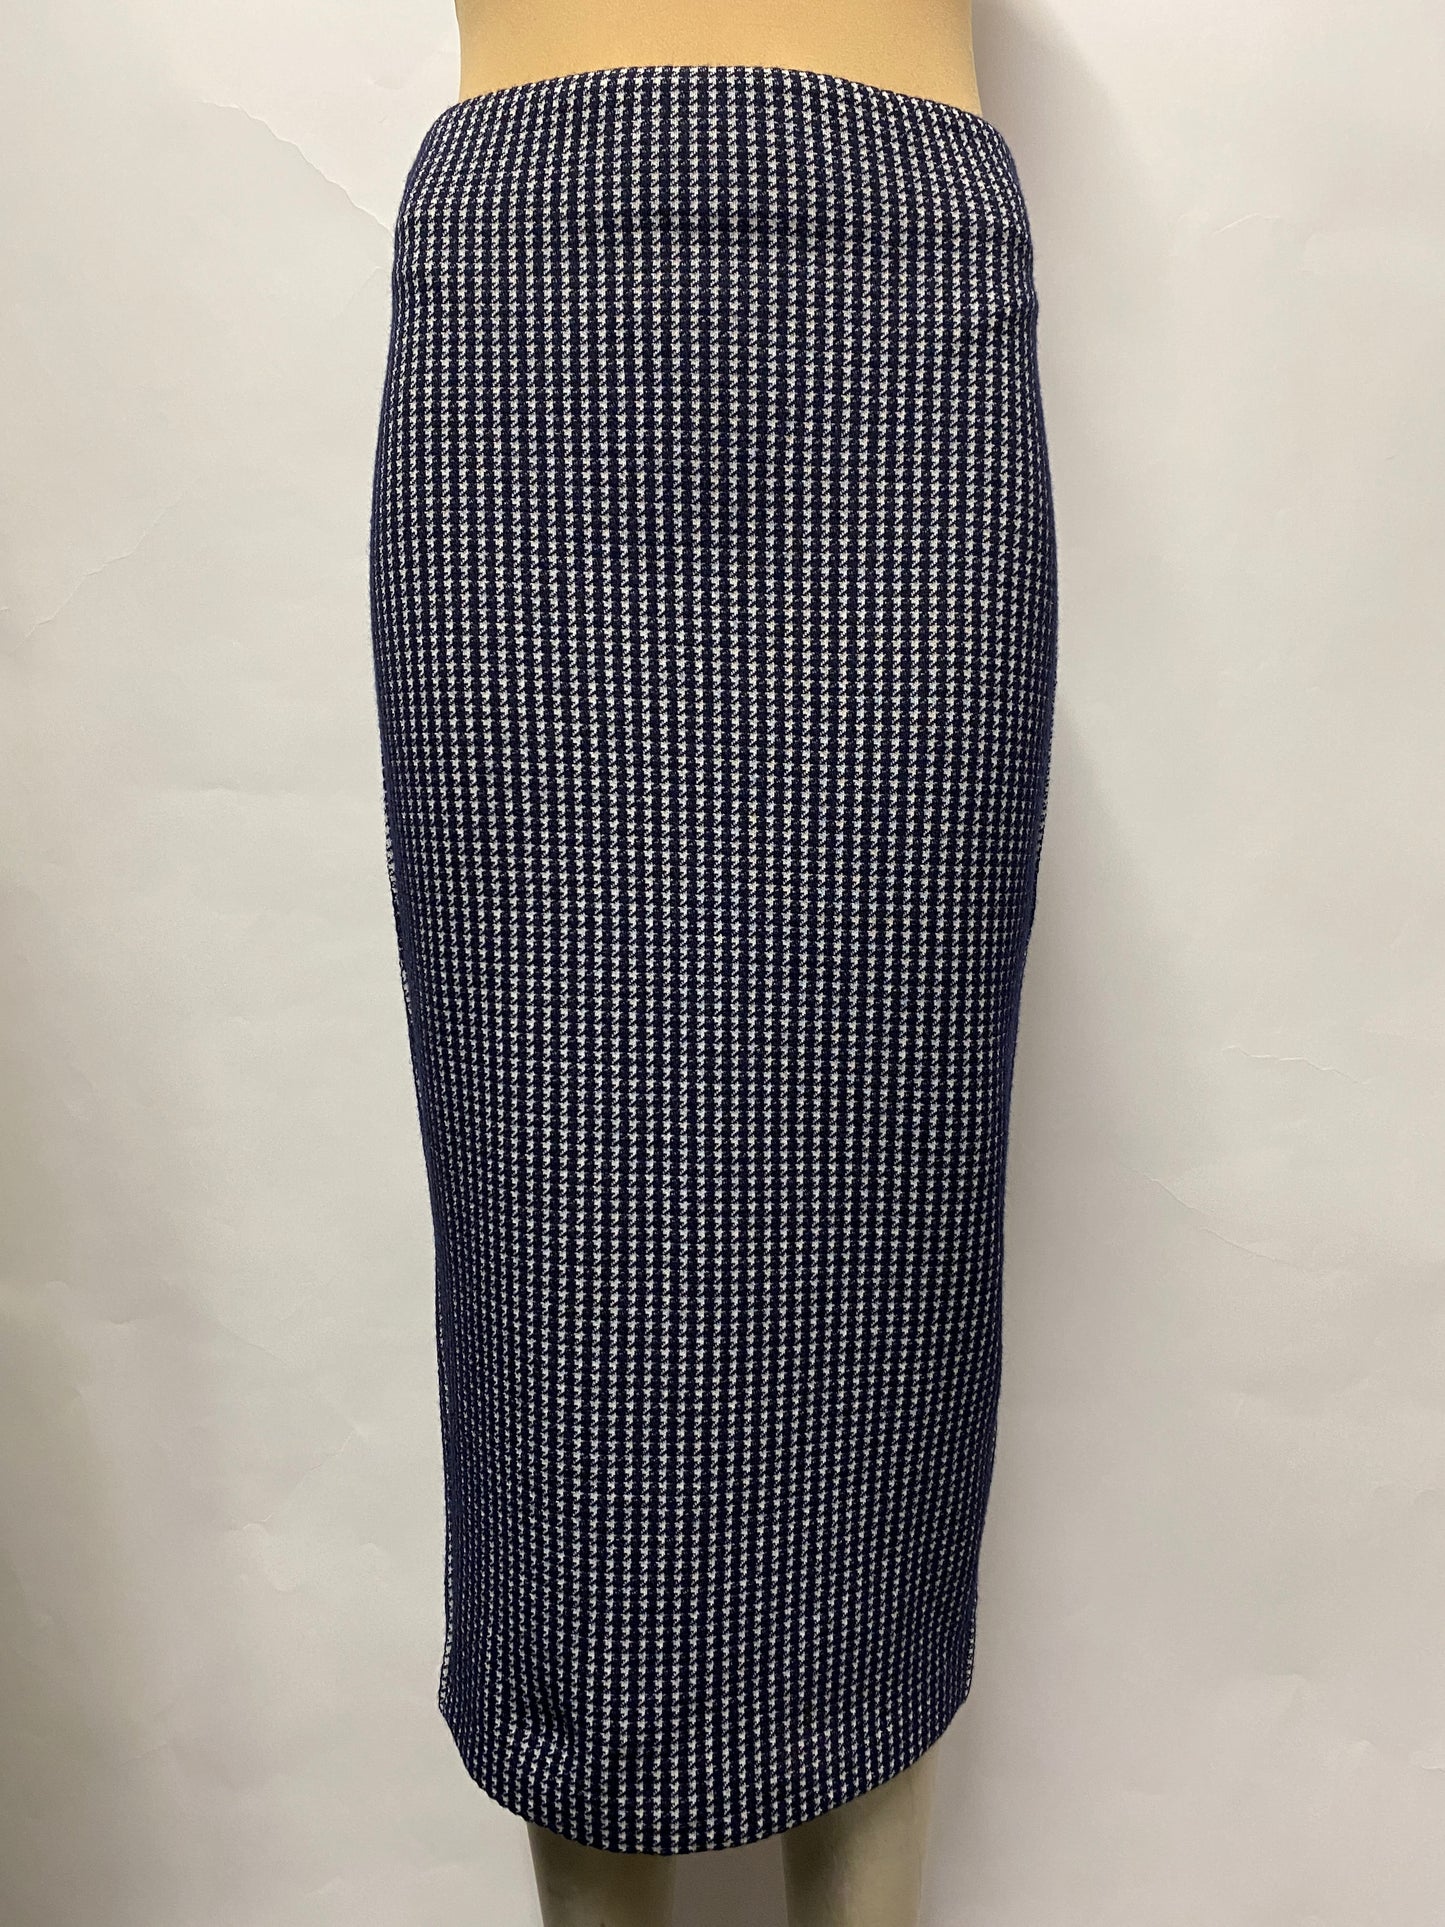 Marella Navy and White Houndstooth Skirt Small BNWT